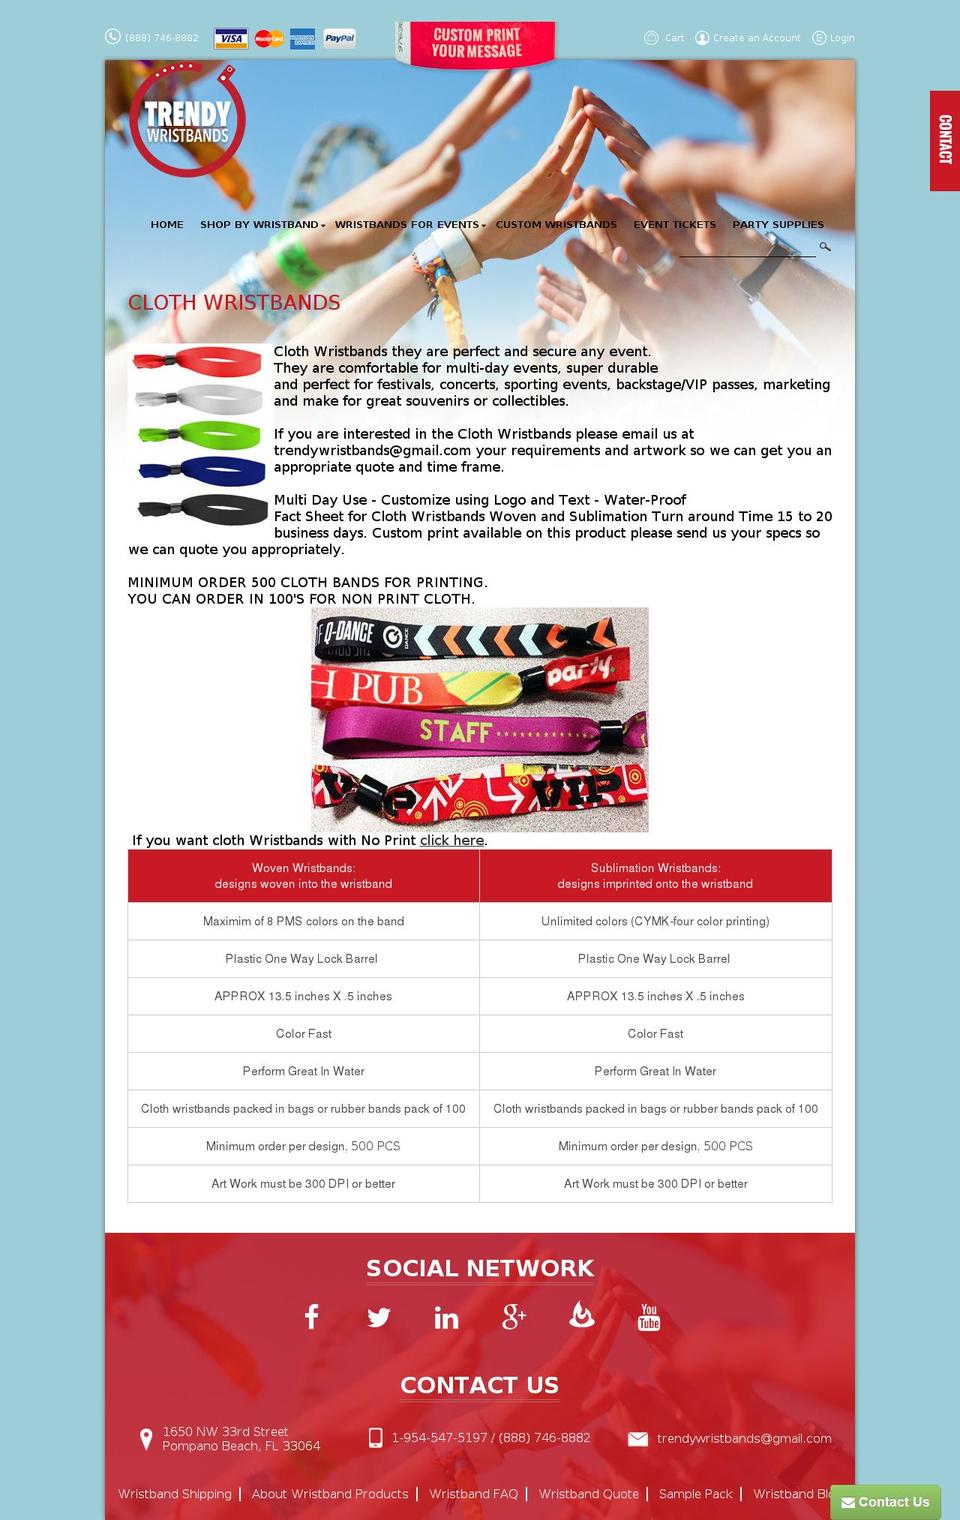 Trendy new home 2\/8\/17 Shopify theme site example wristbandscloth.com